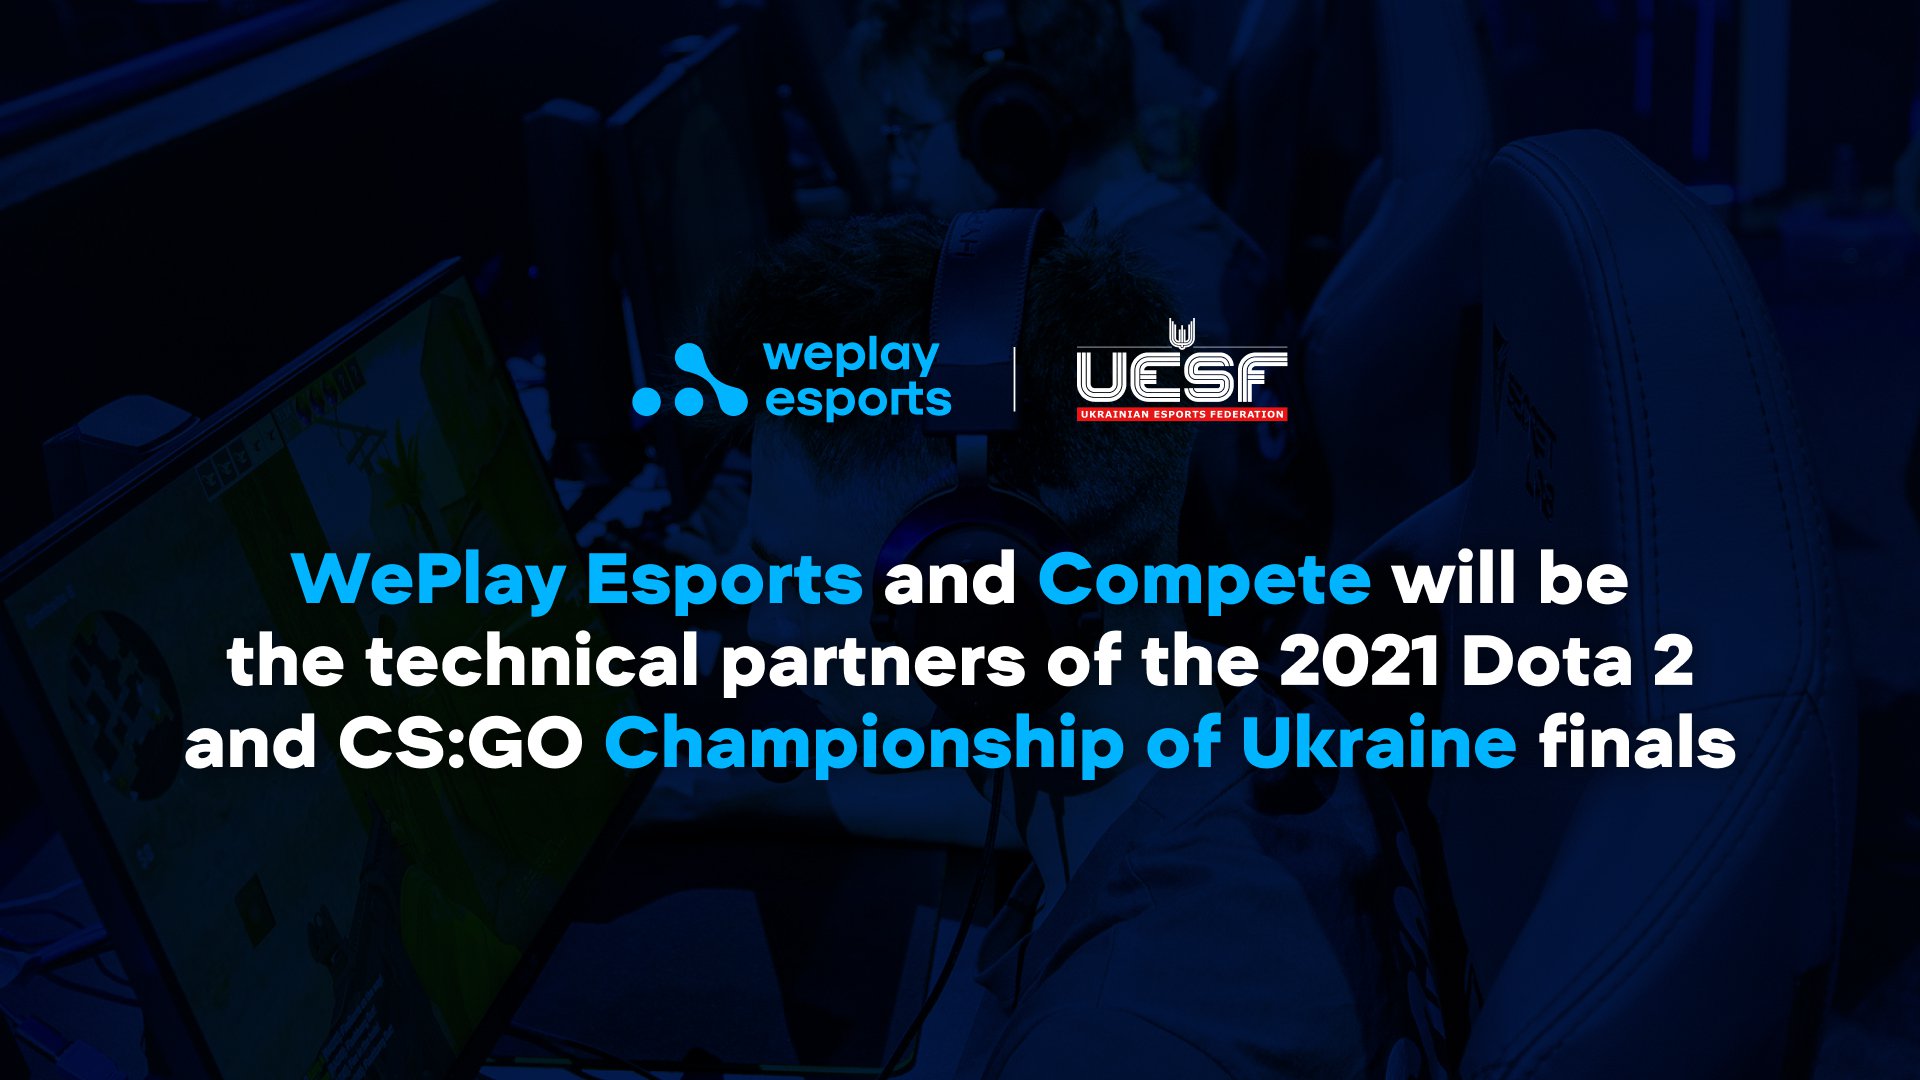 WePlay Esports and Compete will be the technical partners of the 2021 Dota 2 and CS:GO Championship of Ukraine finals. Image: WePlay Holding